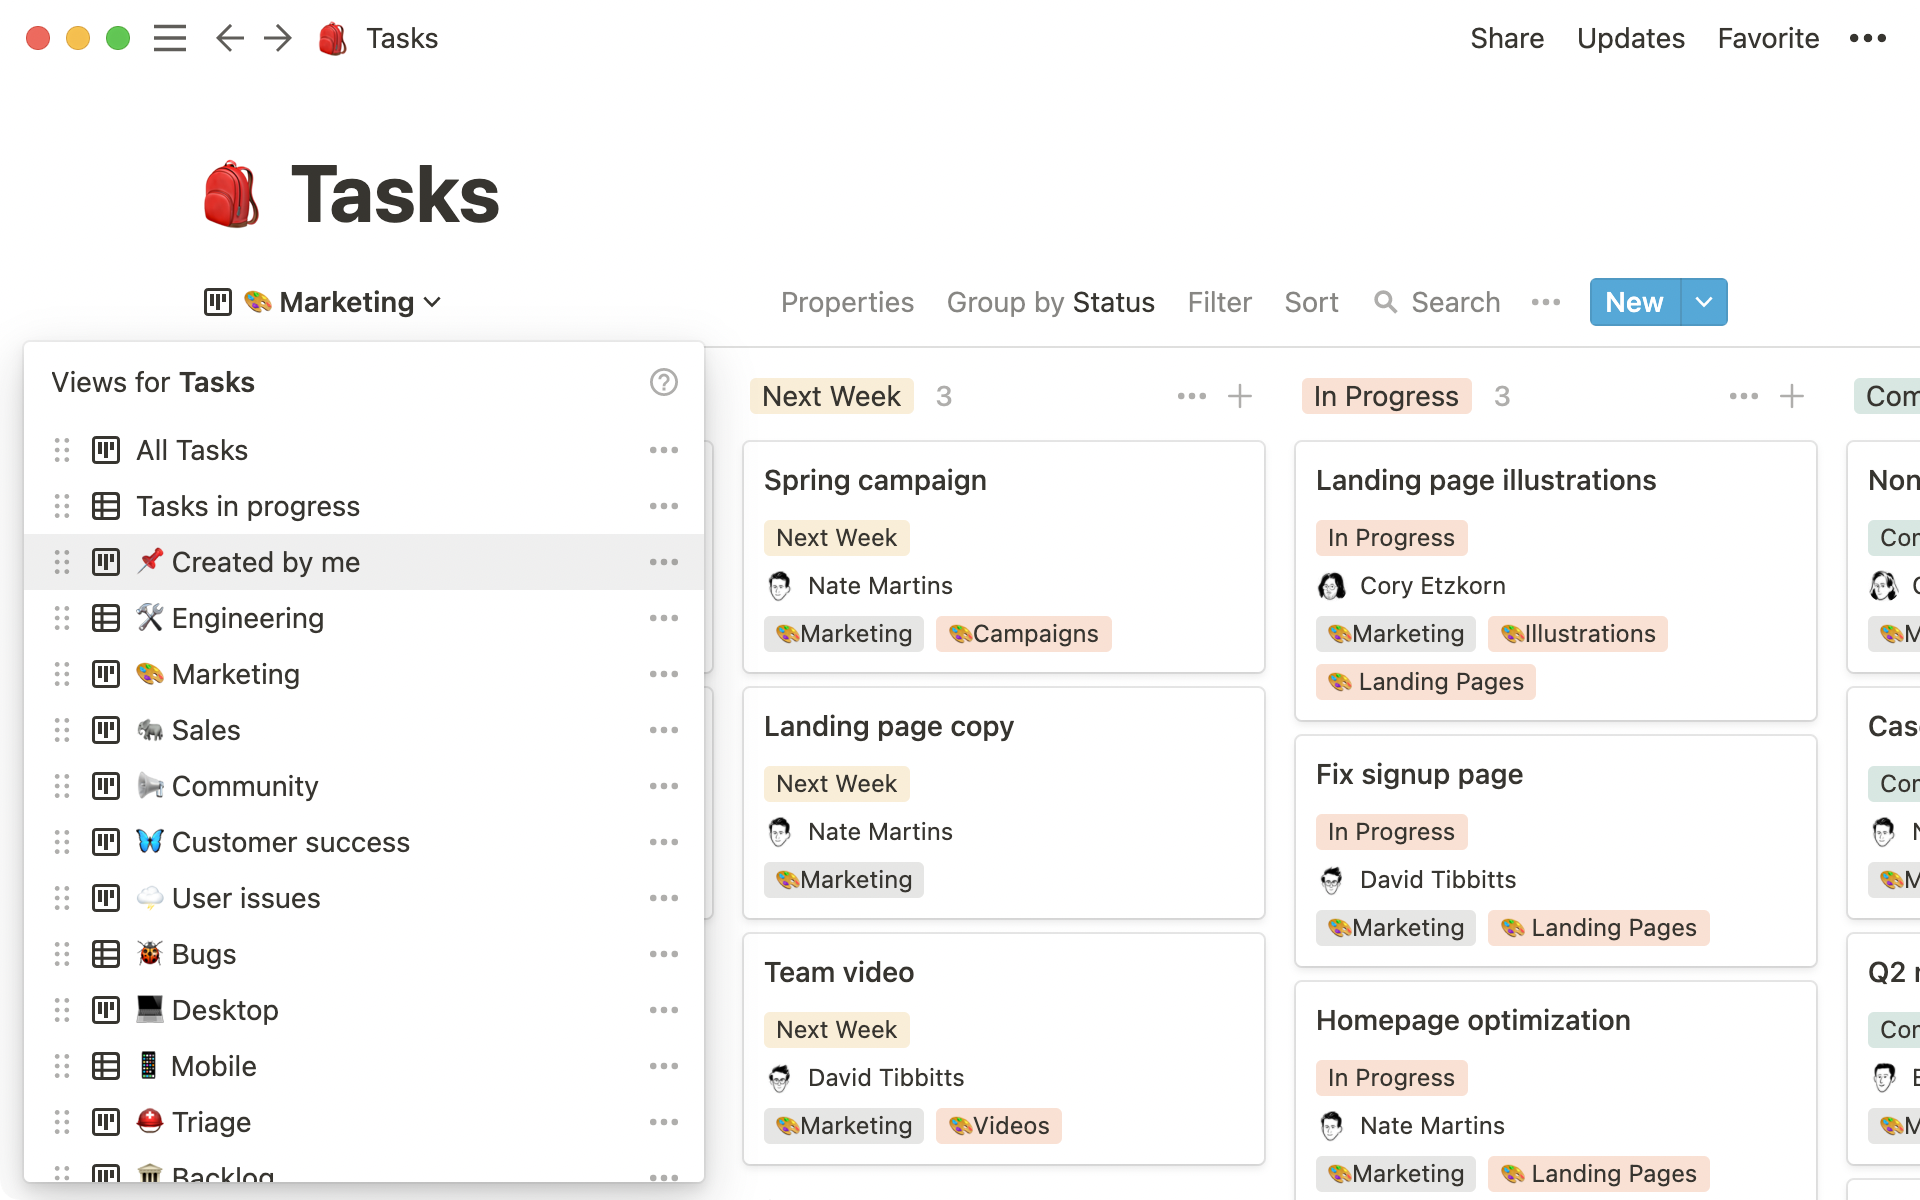 There are many views of the shared tasks database, like views for teams and people. 